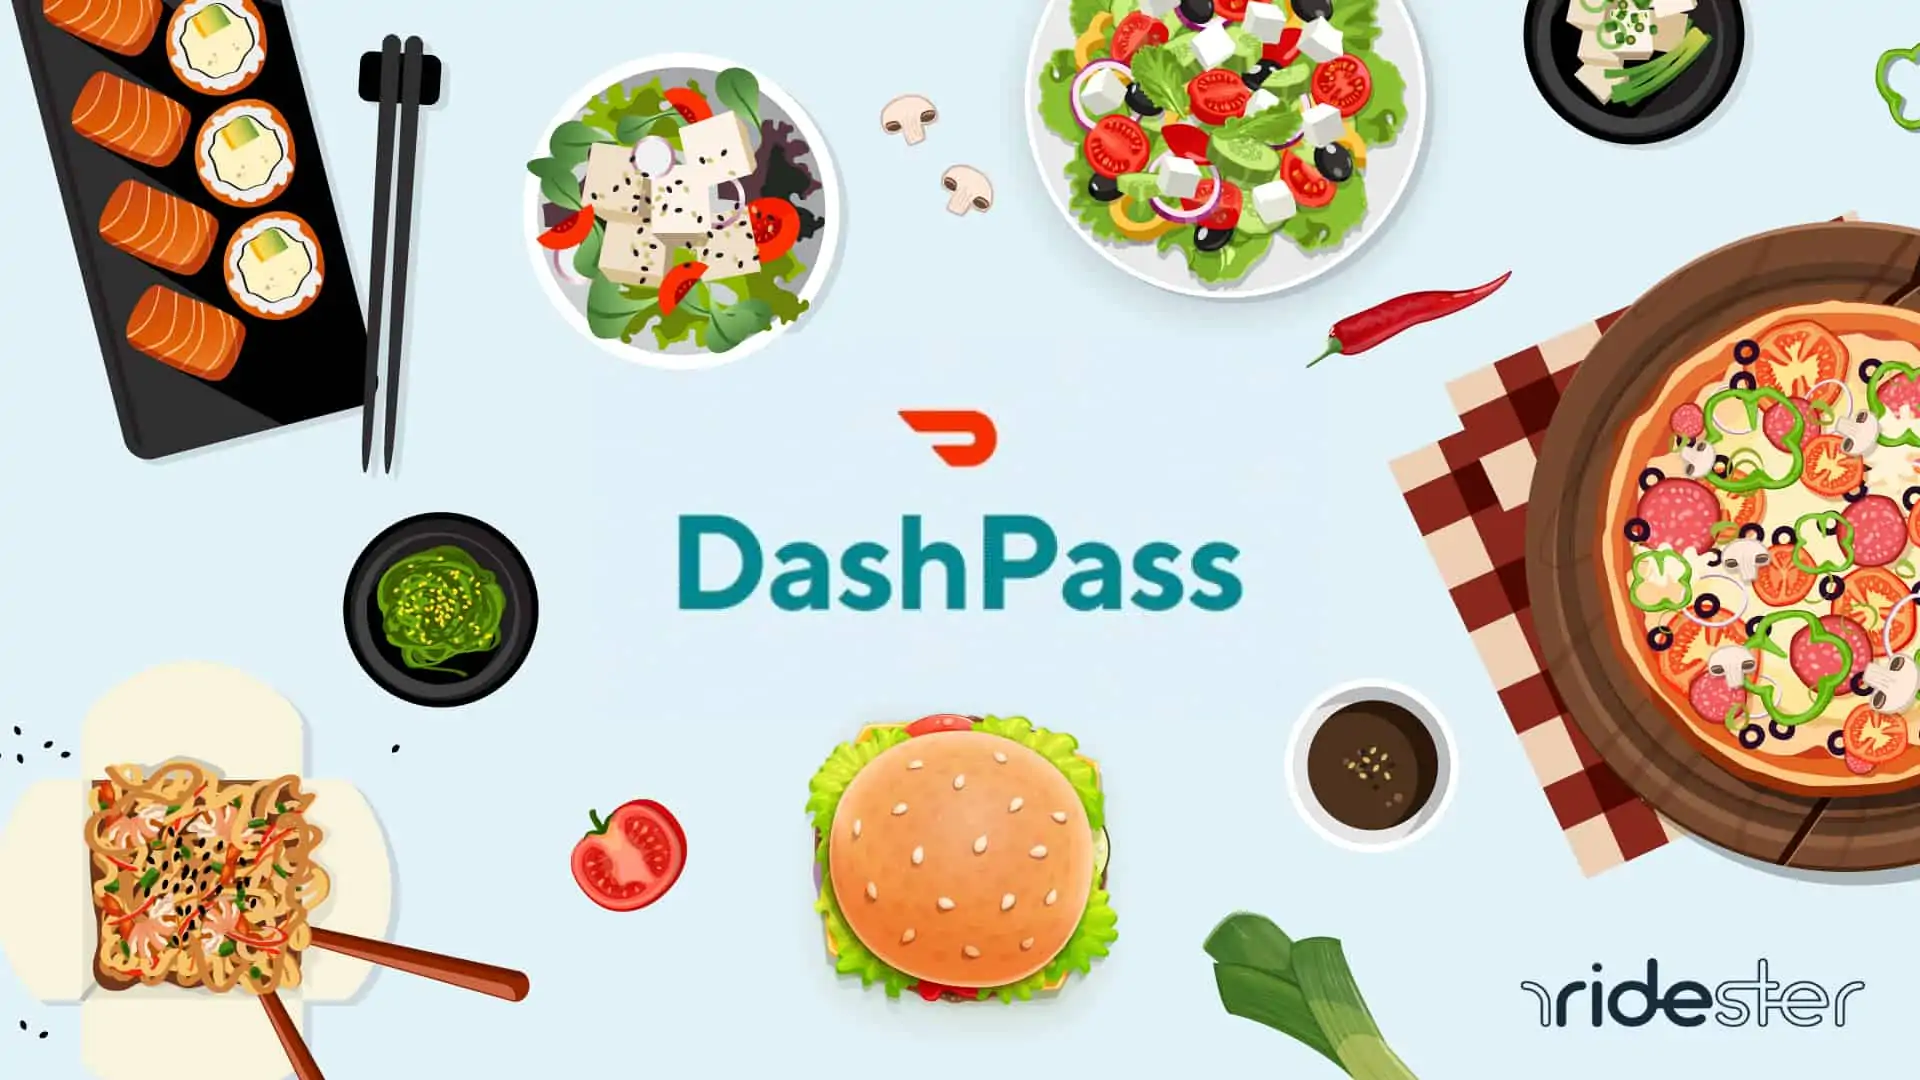 image showing dashpass logo surrounded by food options